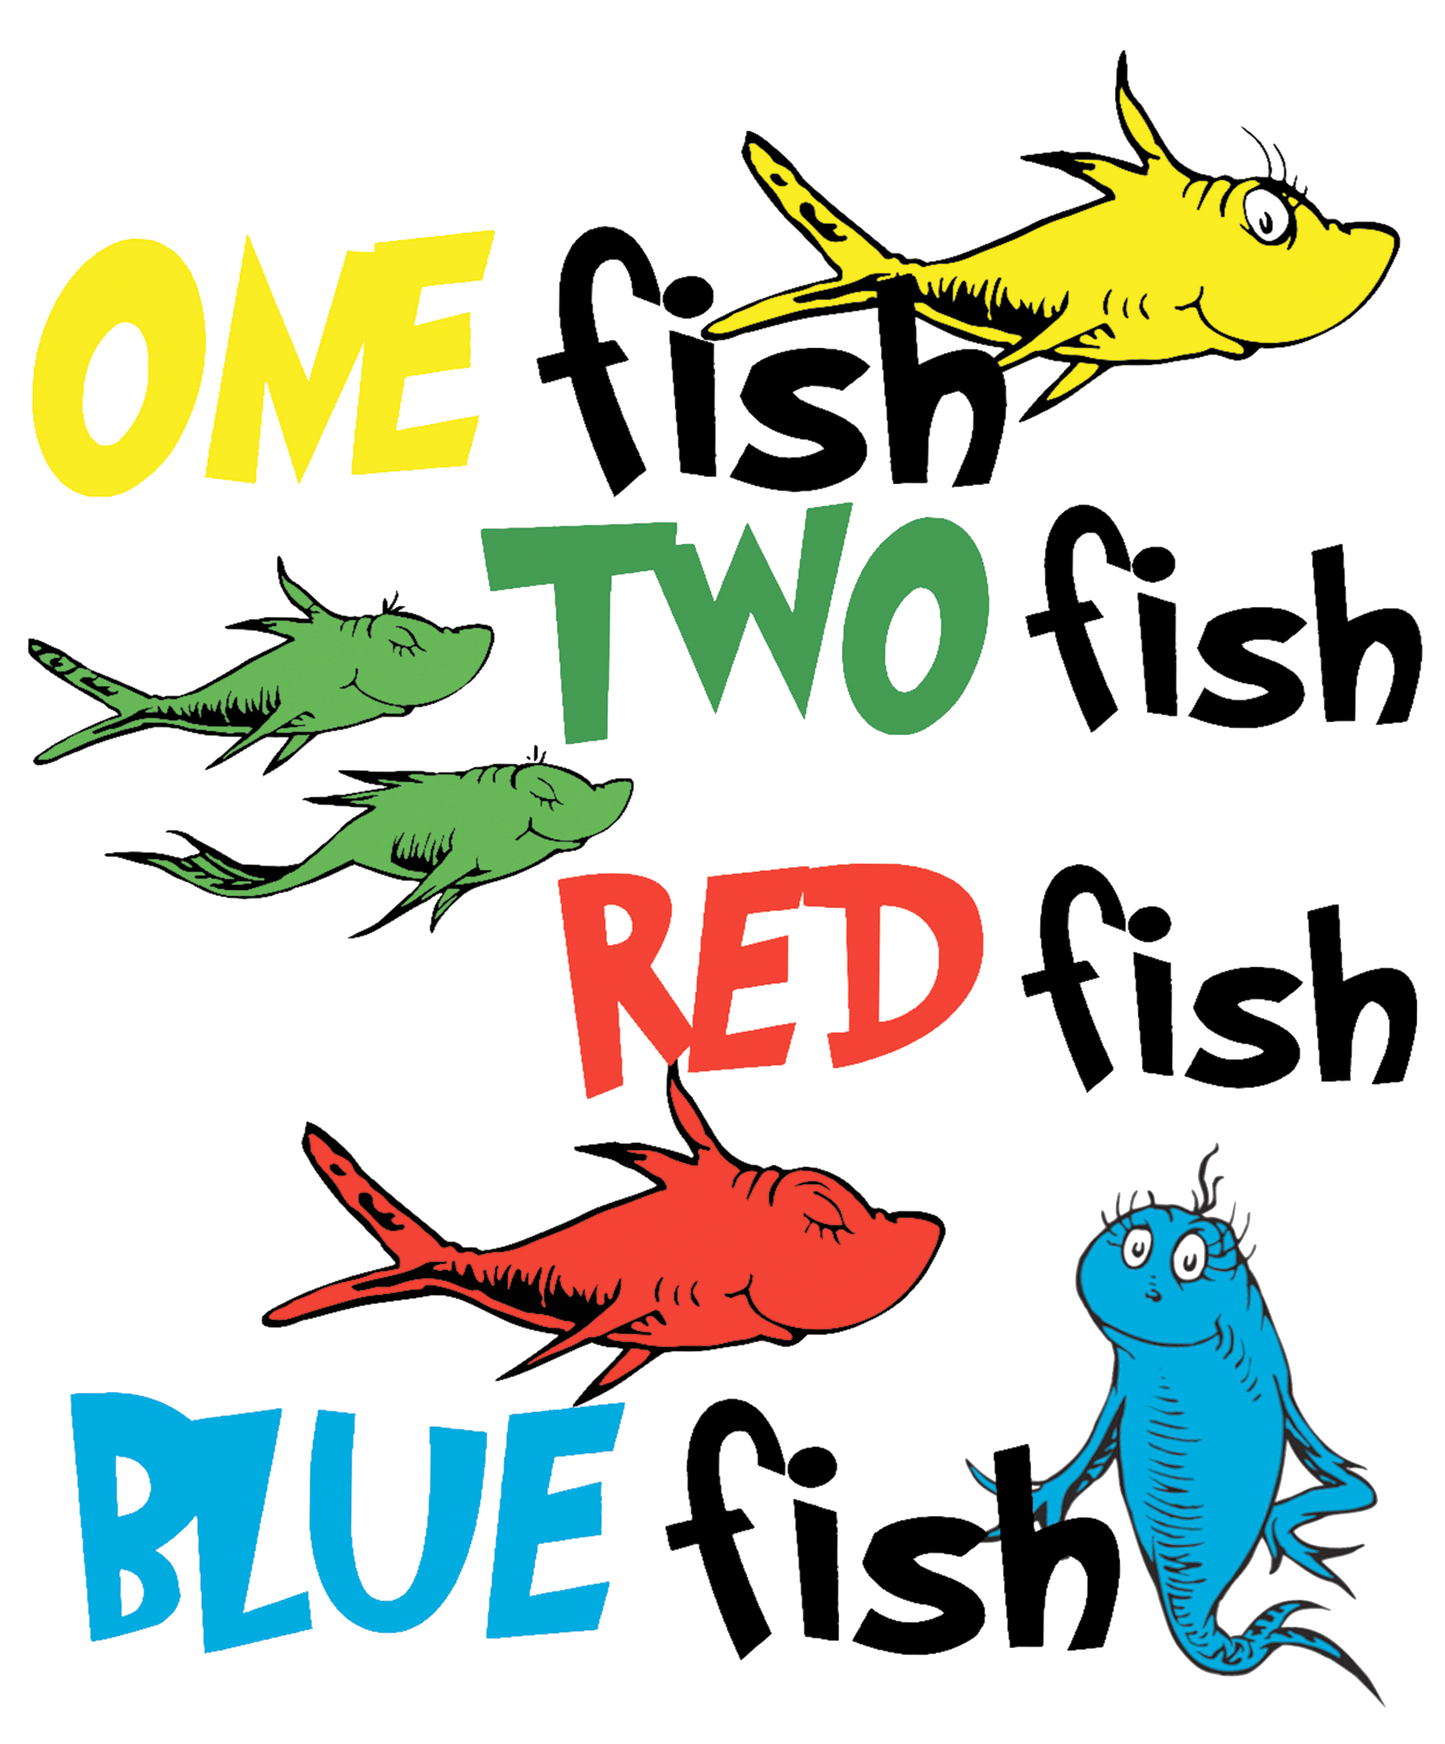 Dr. Suess One Fish, Two Fish Design Transfer